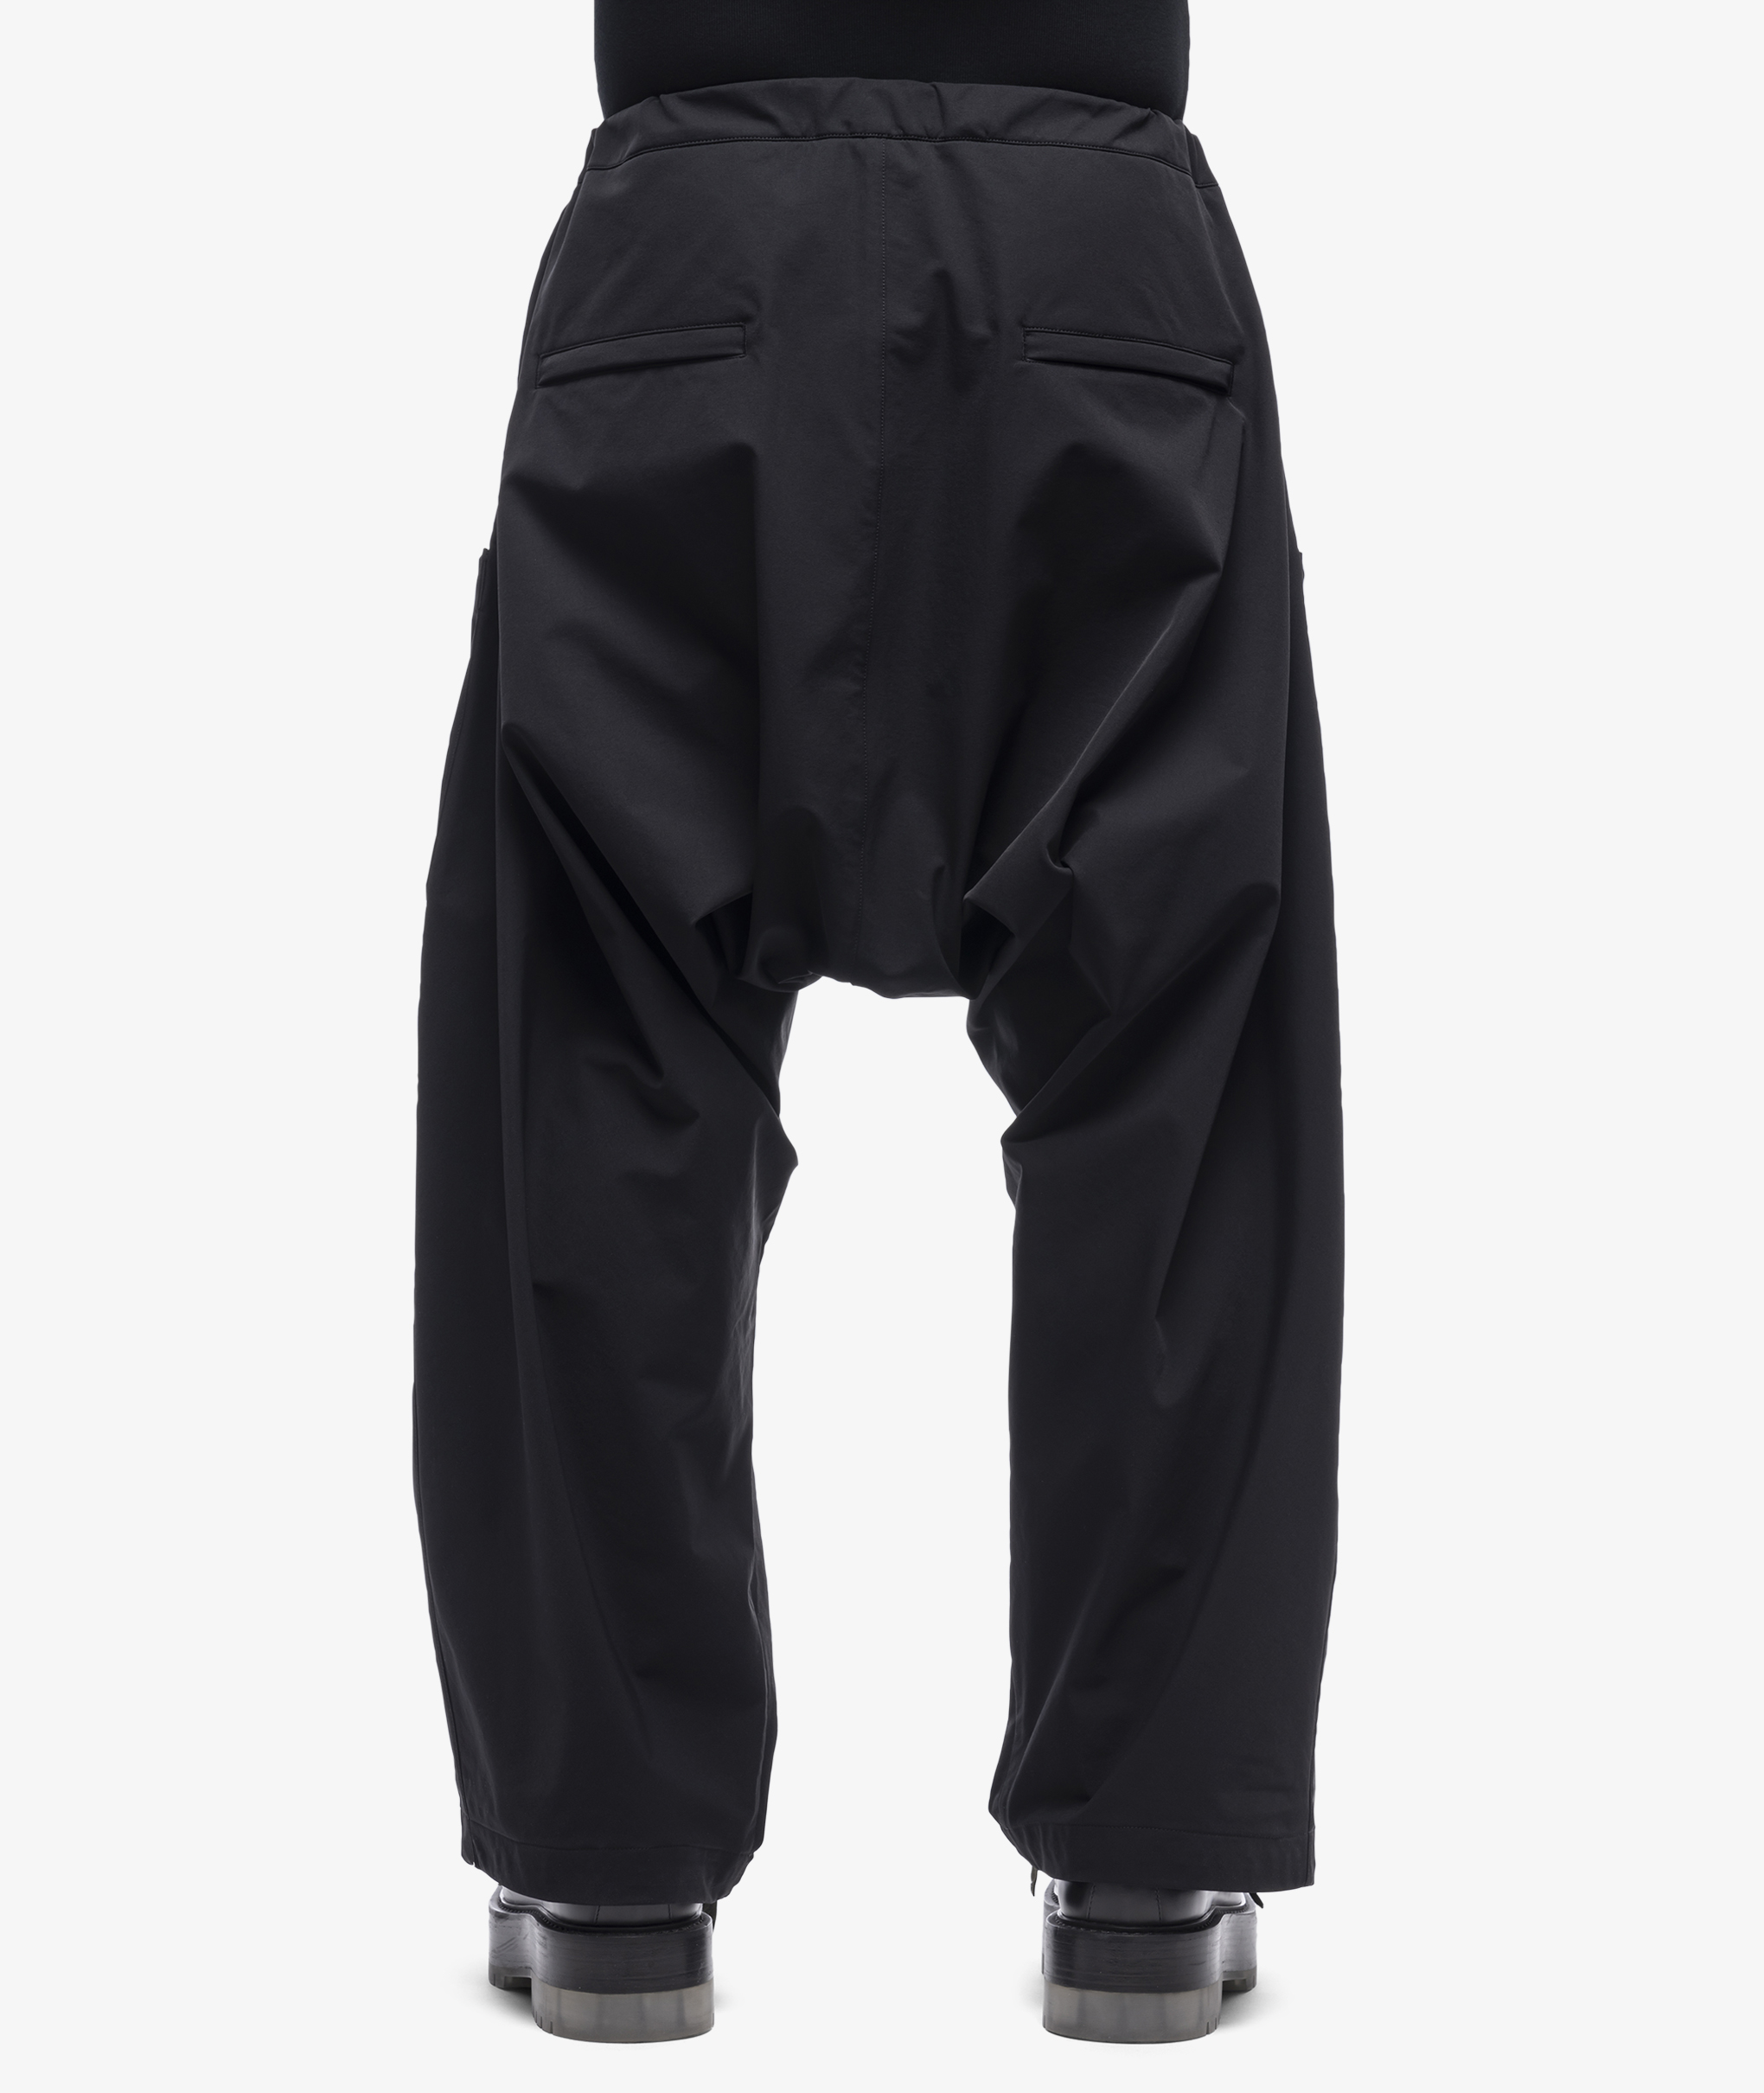 Norse Store | Shipping Worldwide - Acronym P30AL-DS - Black